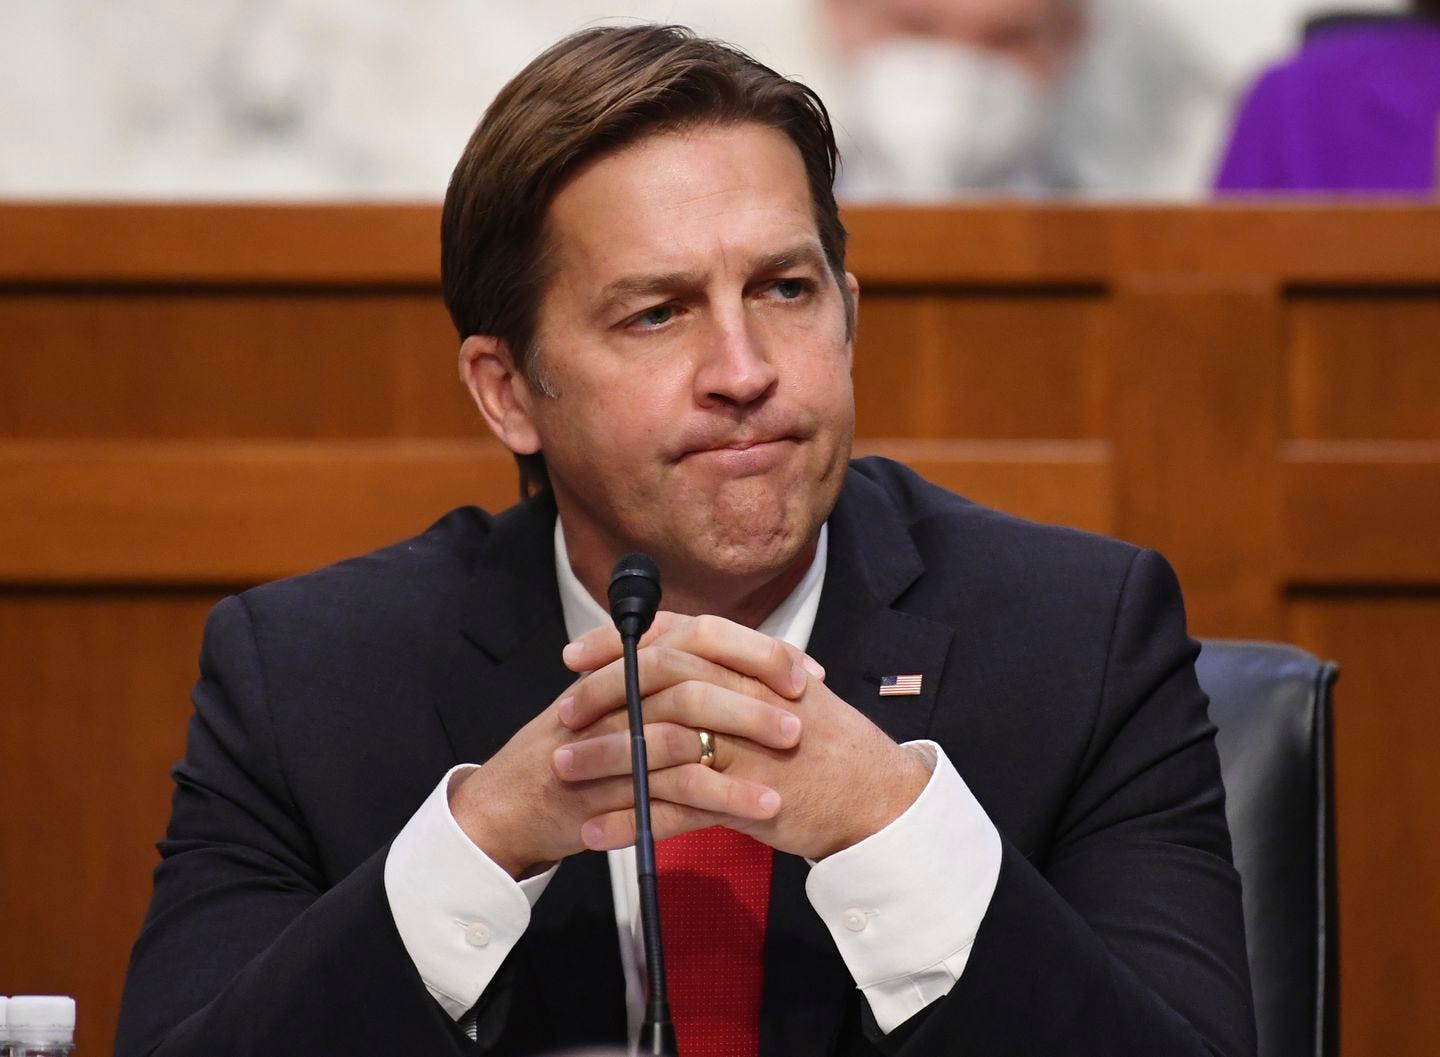 Sen. Ben Sasse, R-Neb., speaks during the confirmation hearing for Supreme Court nominee Amy Coney Barrett, before the Senate Judiciary Committee, Thursday, Oct. 15, 2020, on Capitol Hill in Washington.